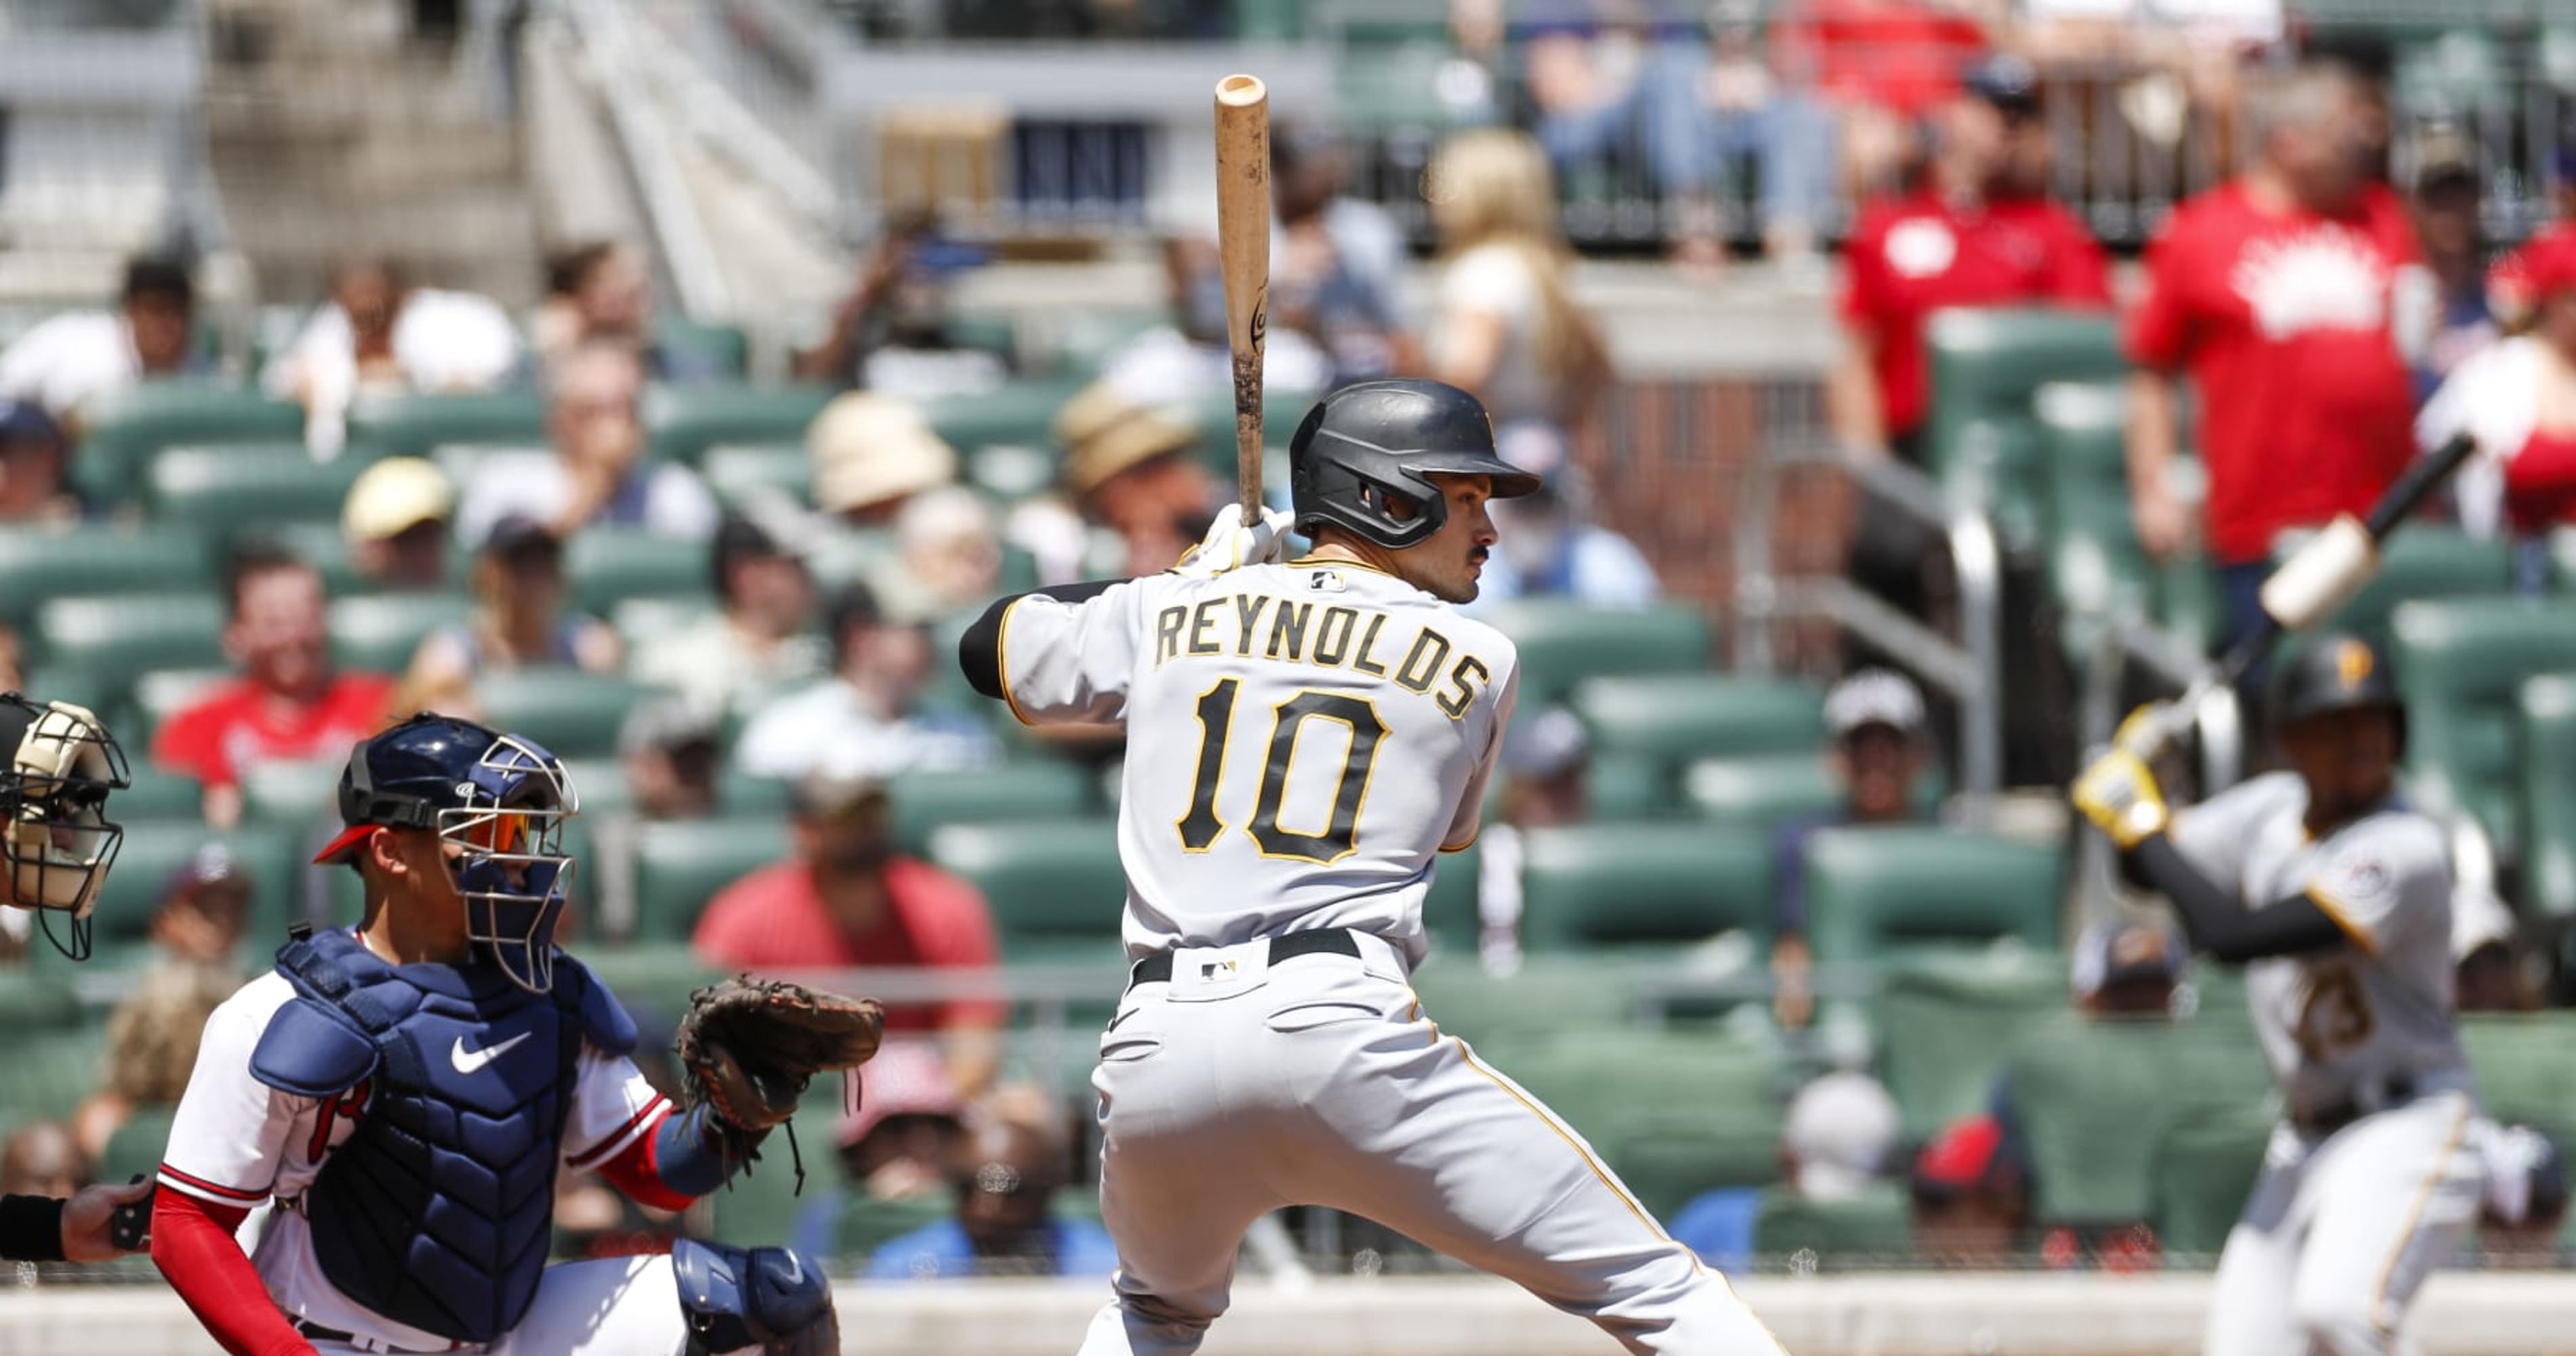 Chicago Cubs: 3 trades with Oakland Athletics to blow it up